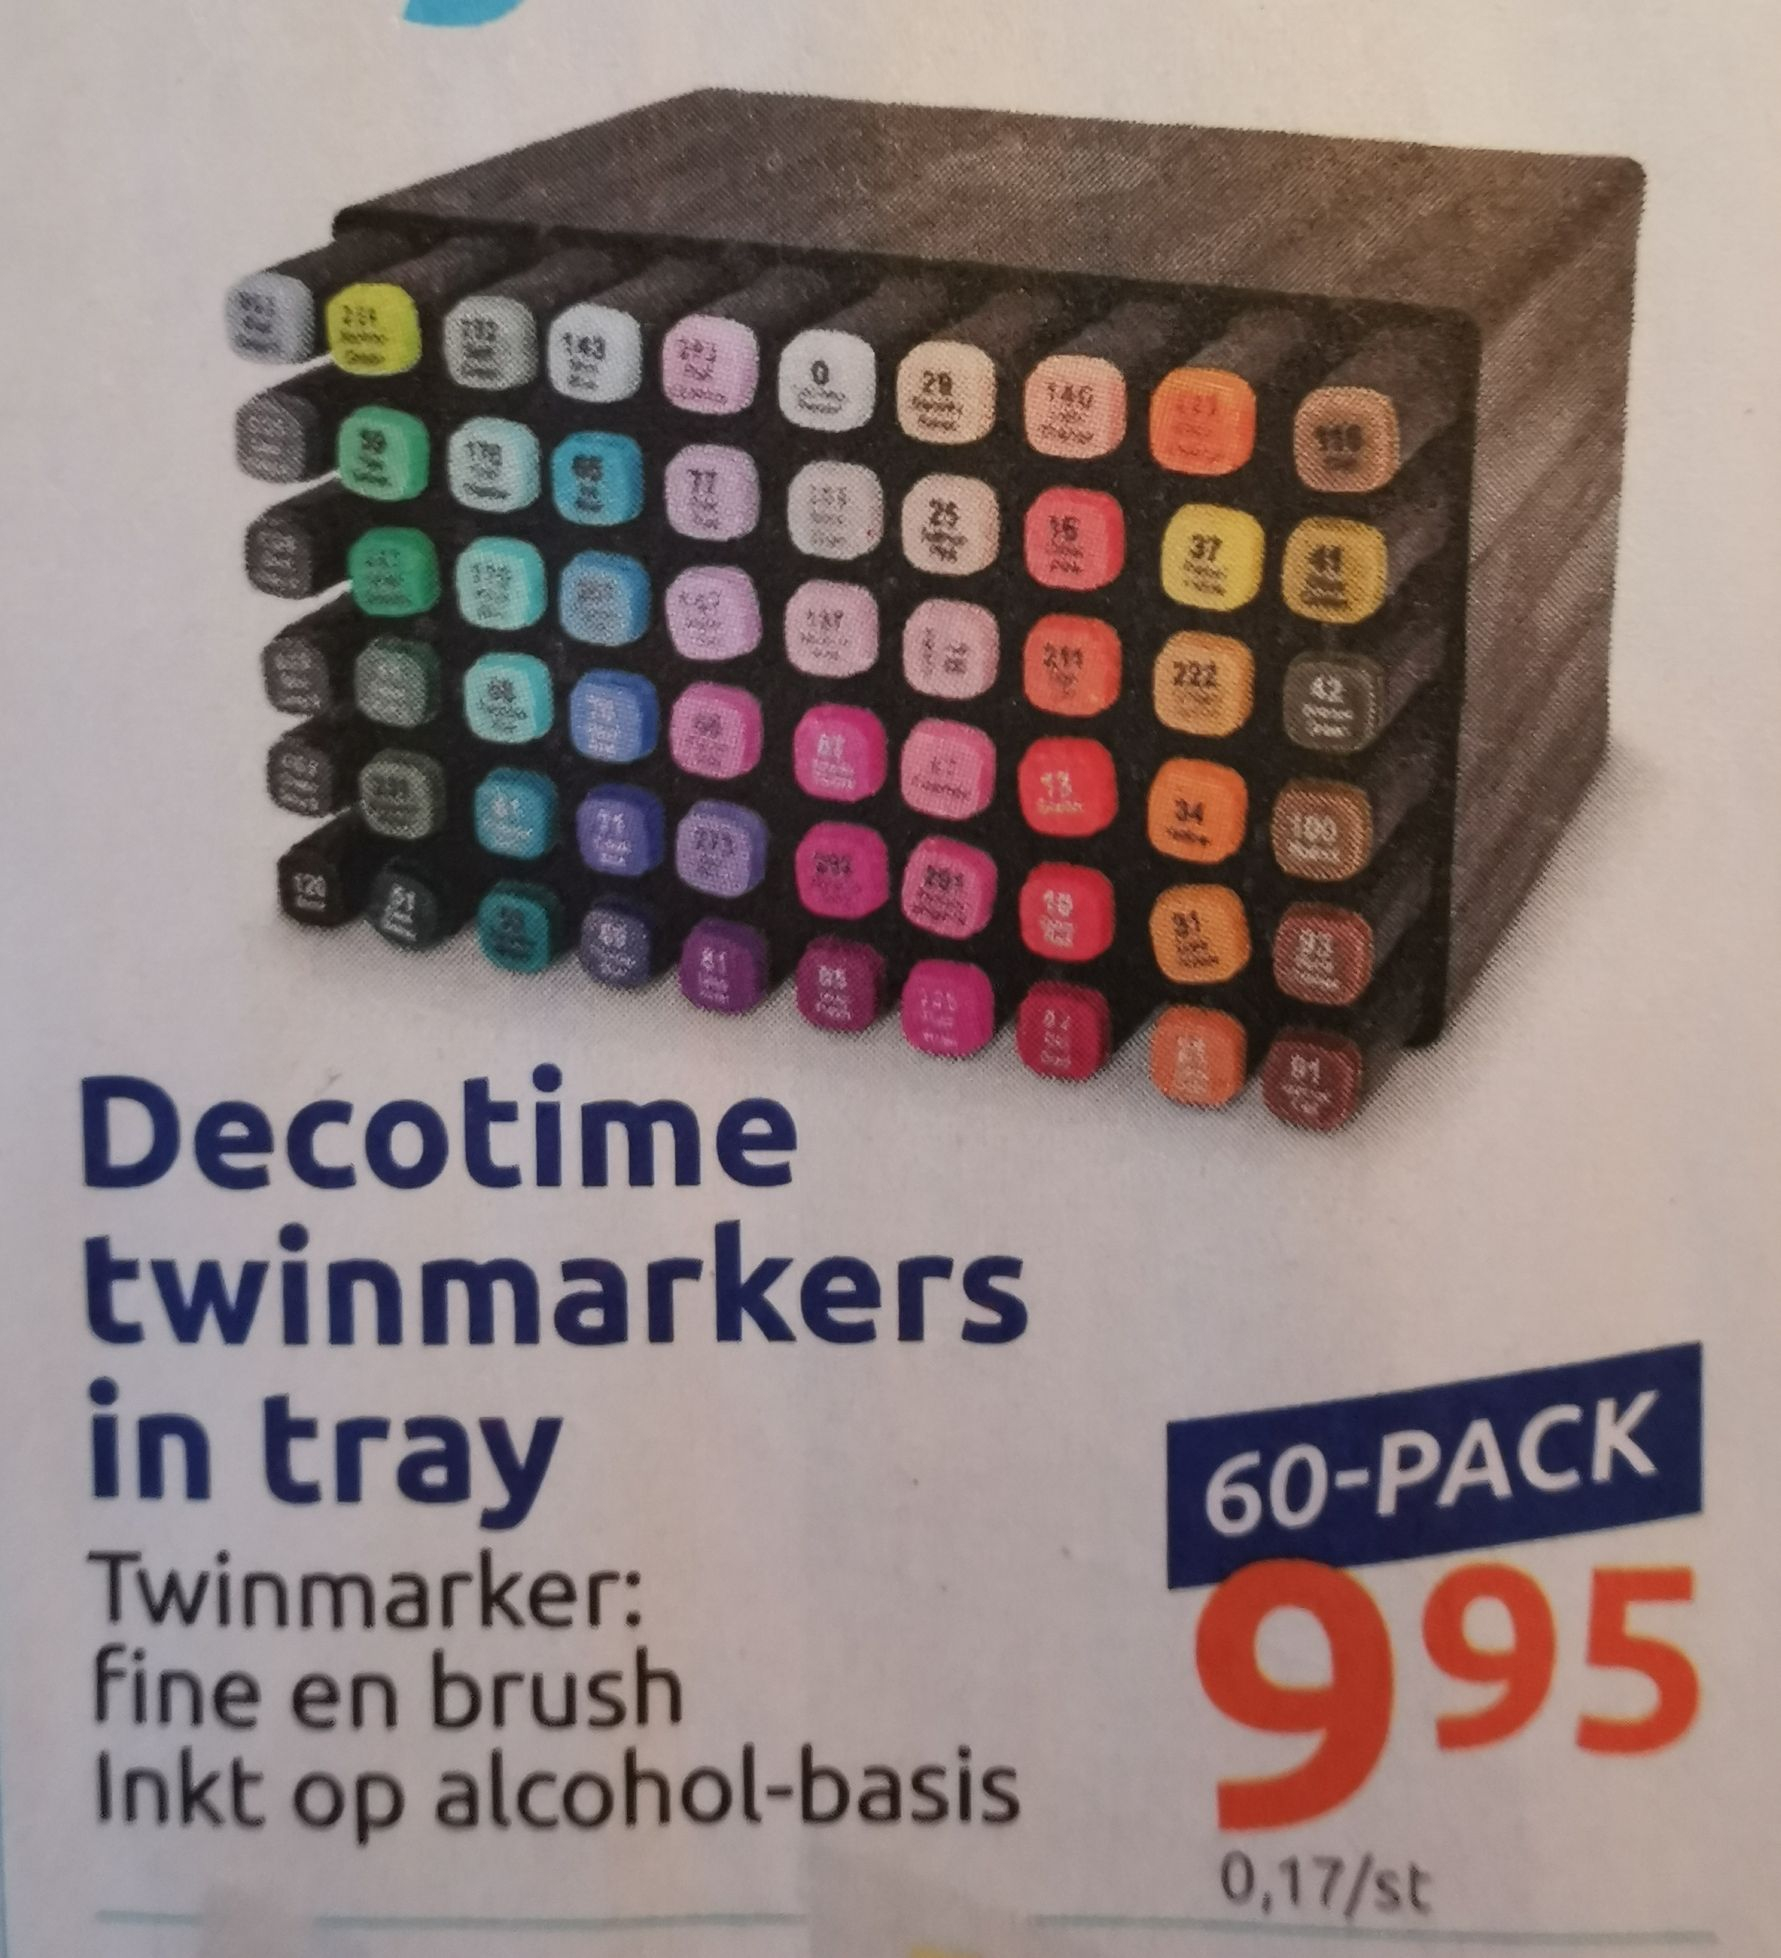 Veilig Afrika vasthoudend 60-pack Decotime twinmarkers in tray @ Action - Pepper.com